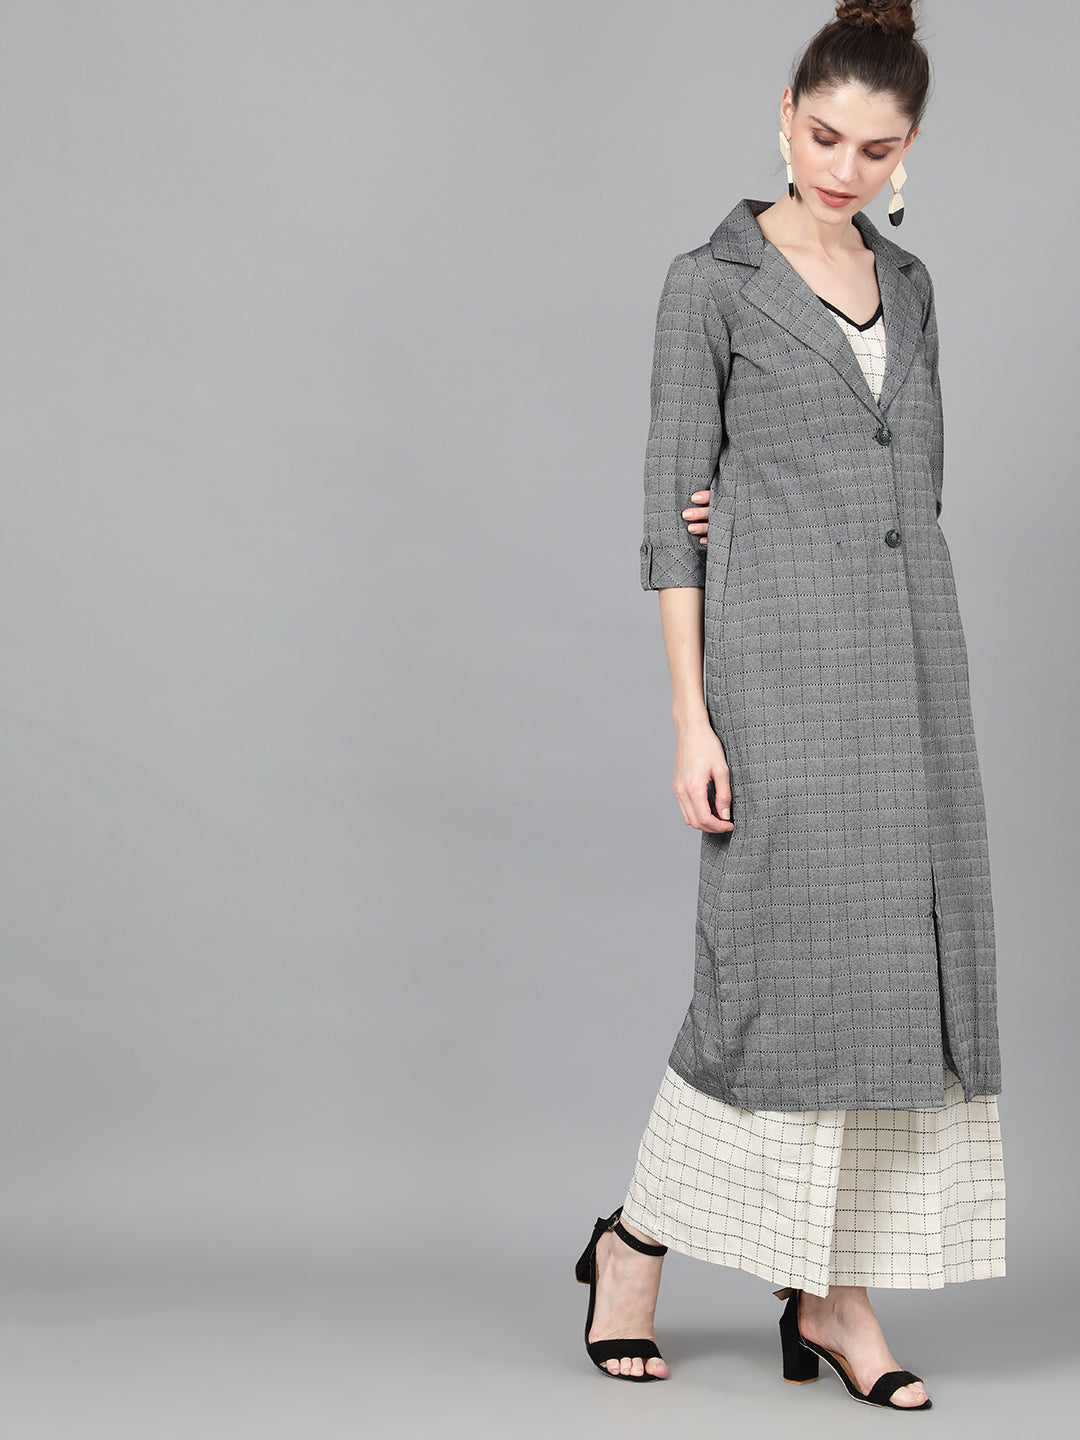 Grey Checked Roll Up Sleeves Long Jacket